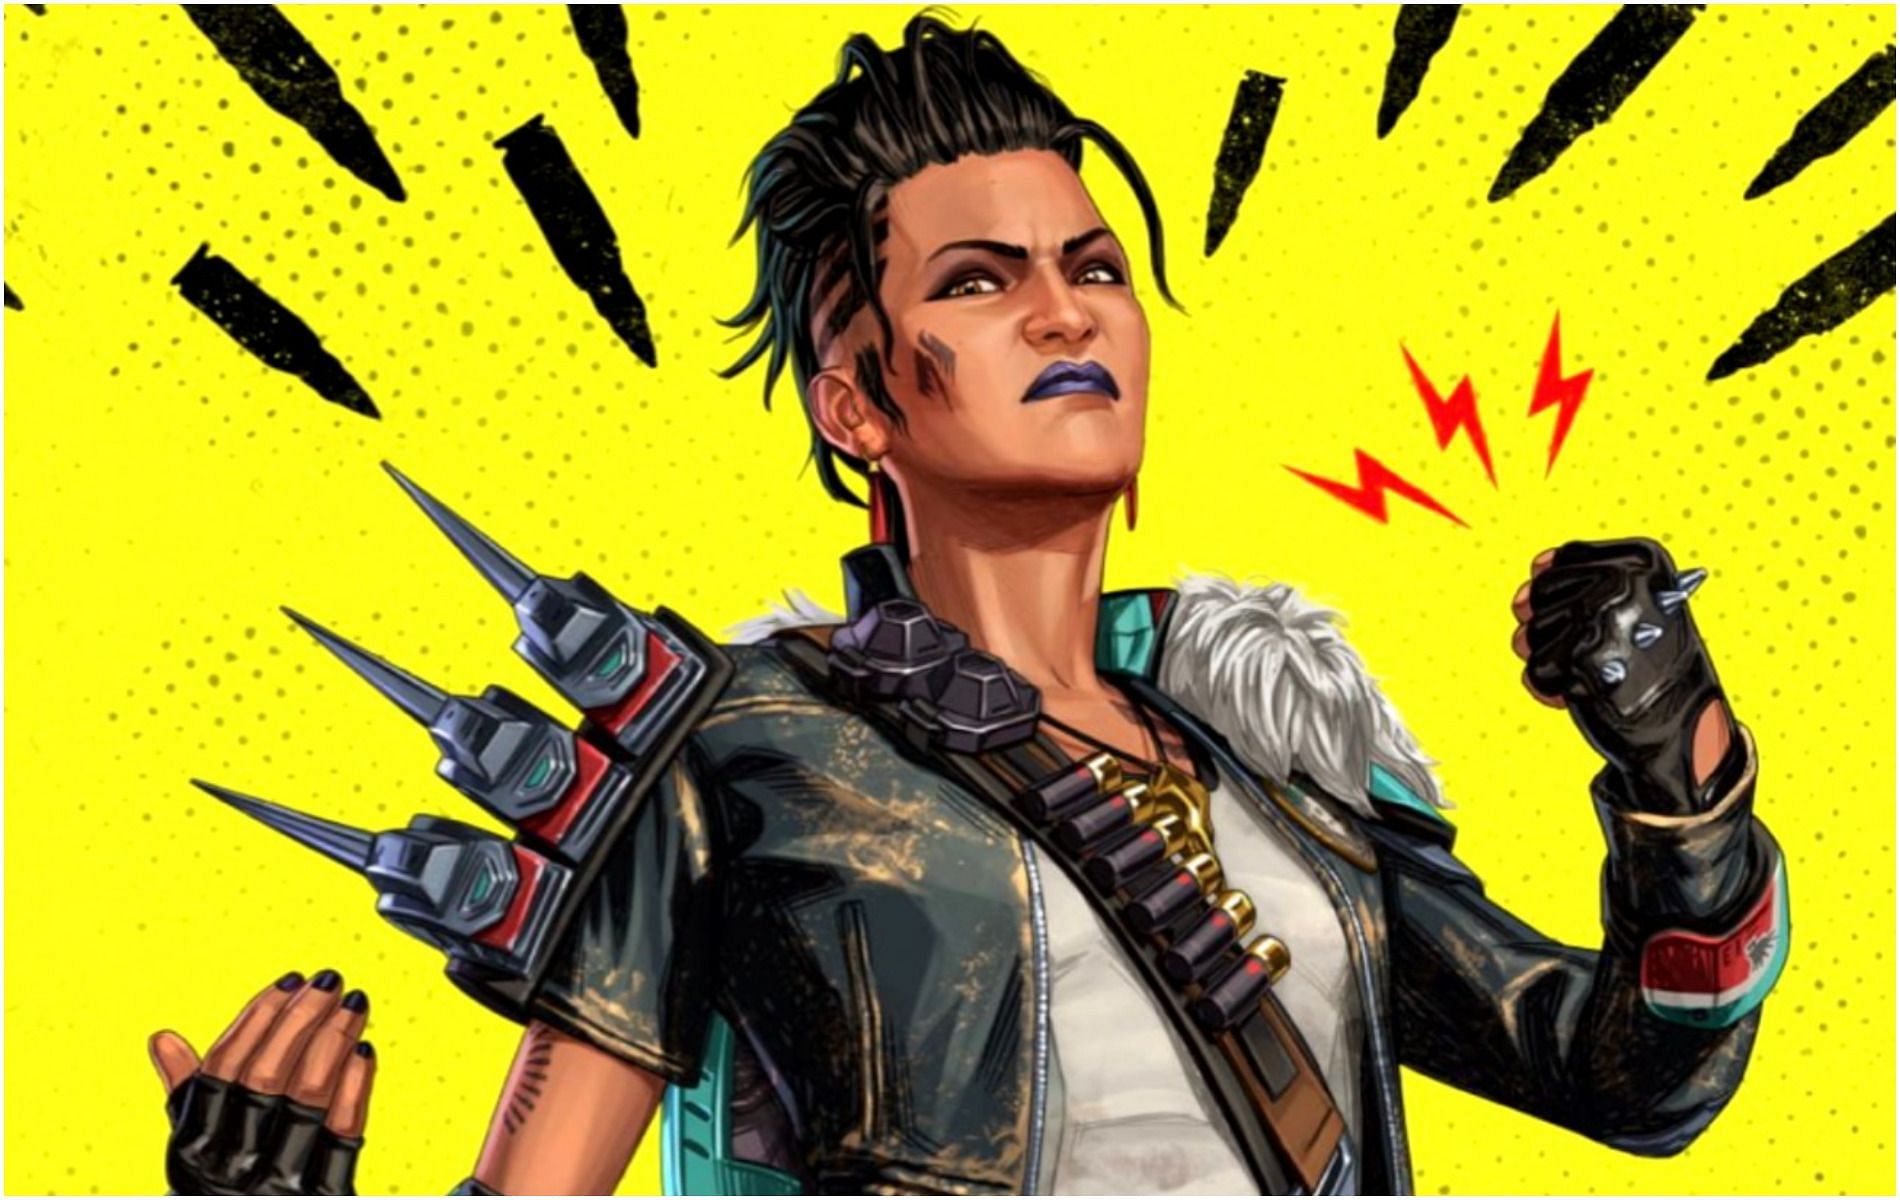 Mad Maggie is the new character in Apex Legends (Image via Respawn Entertainment)